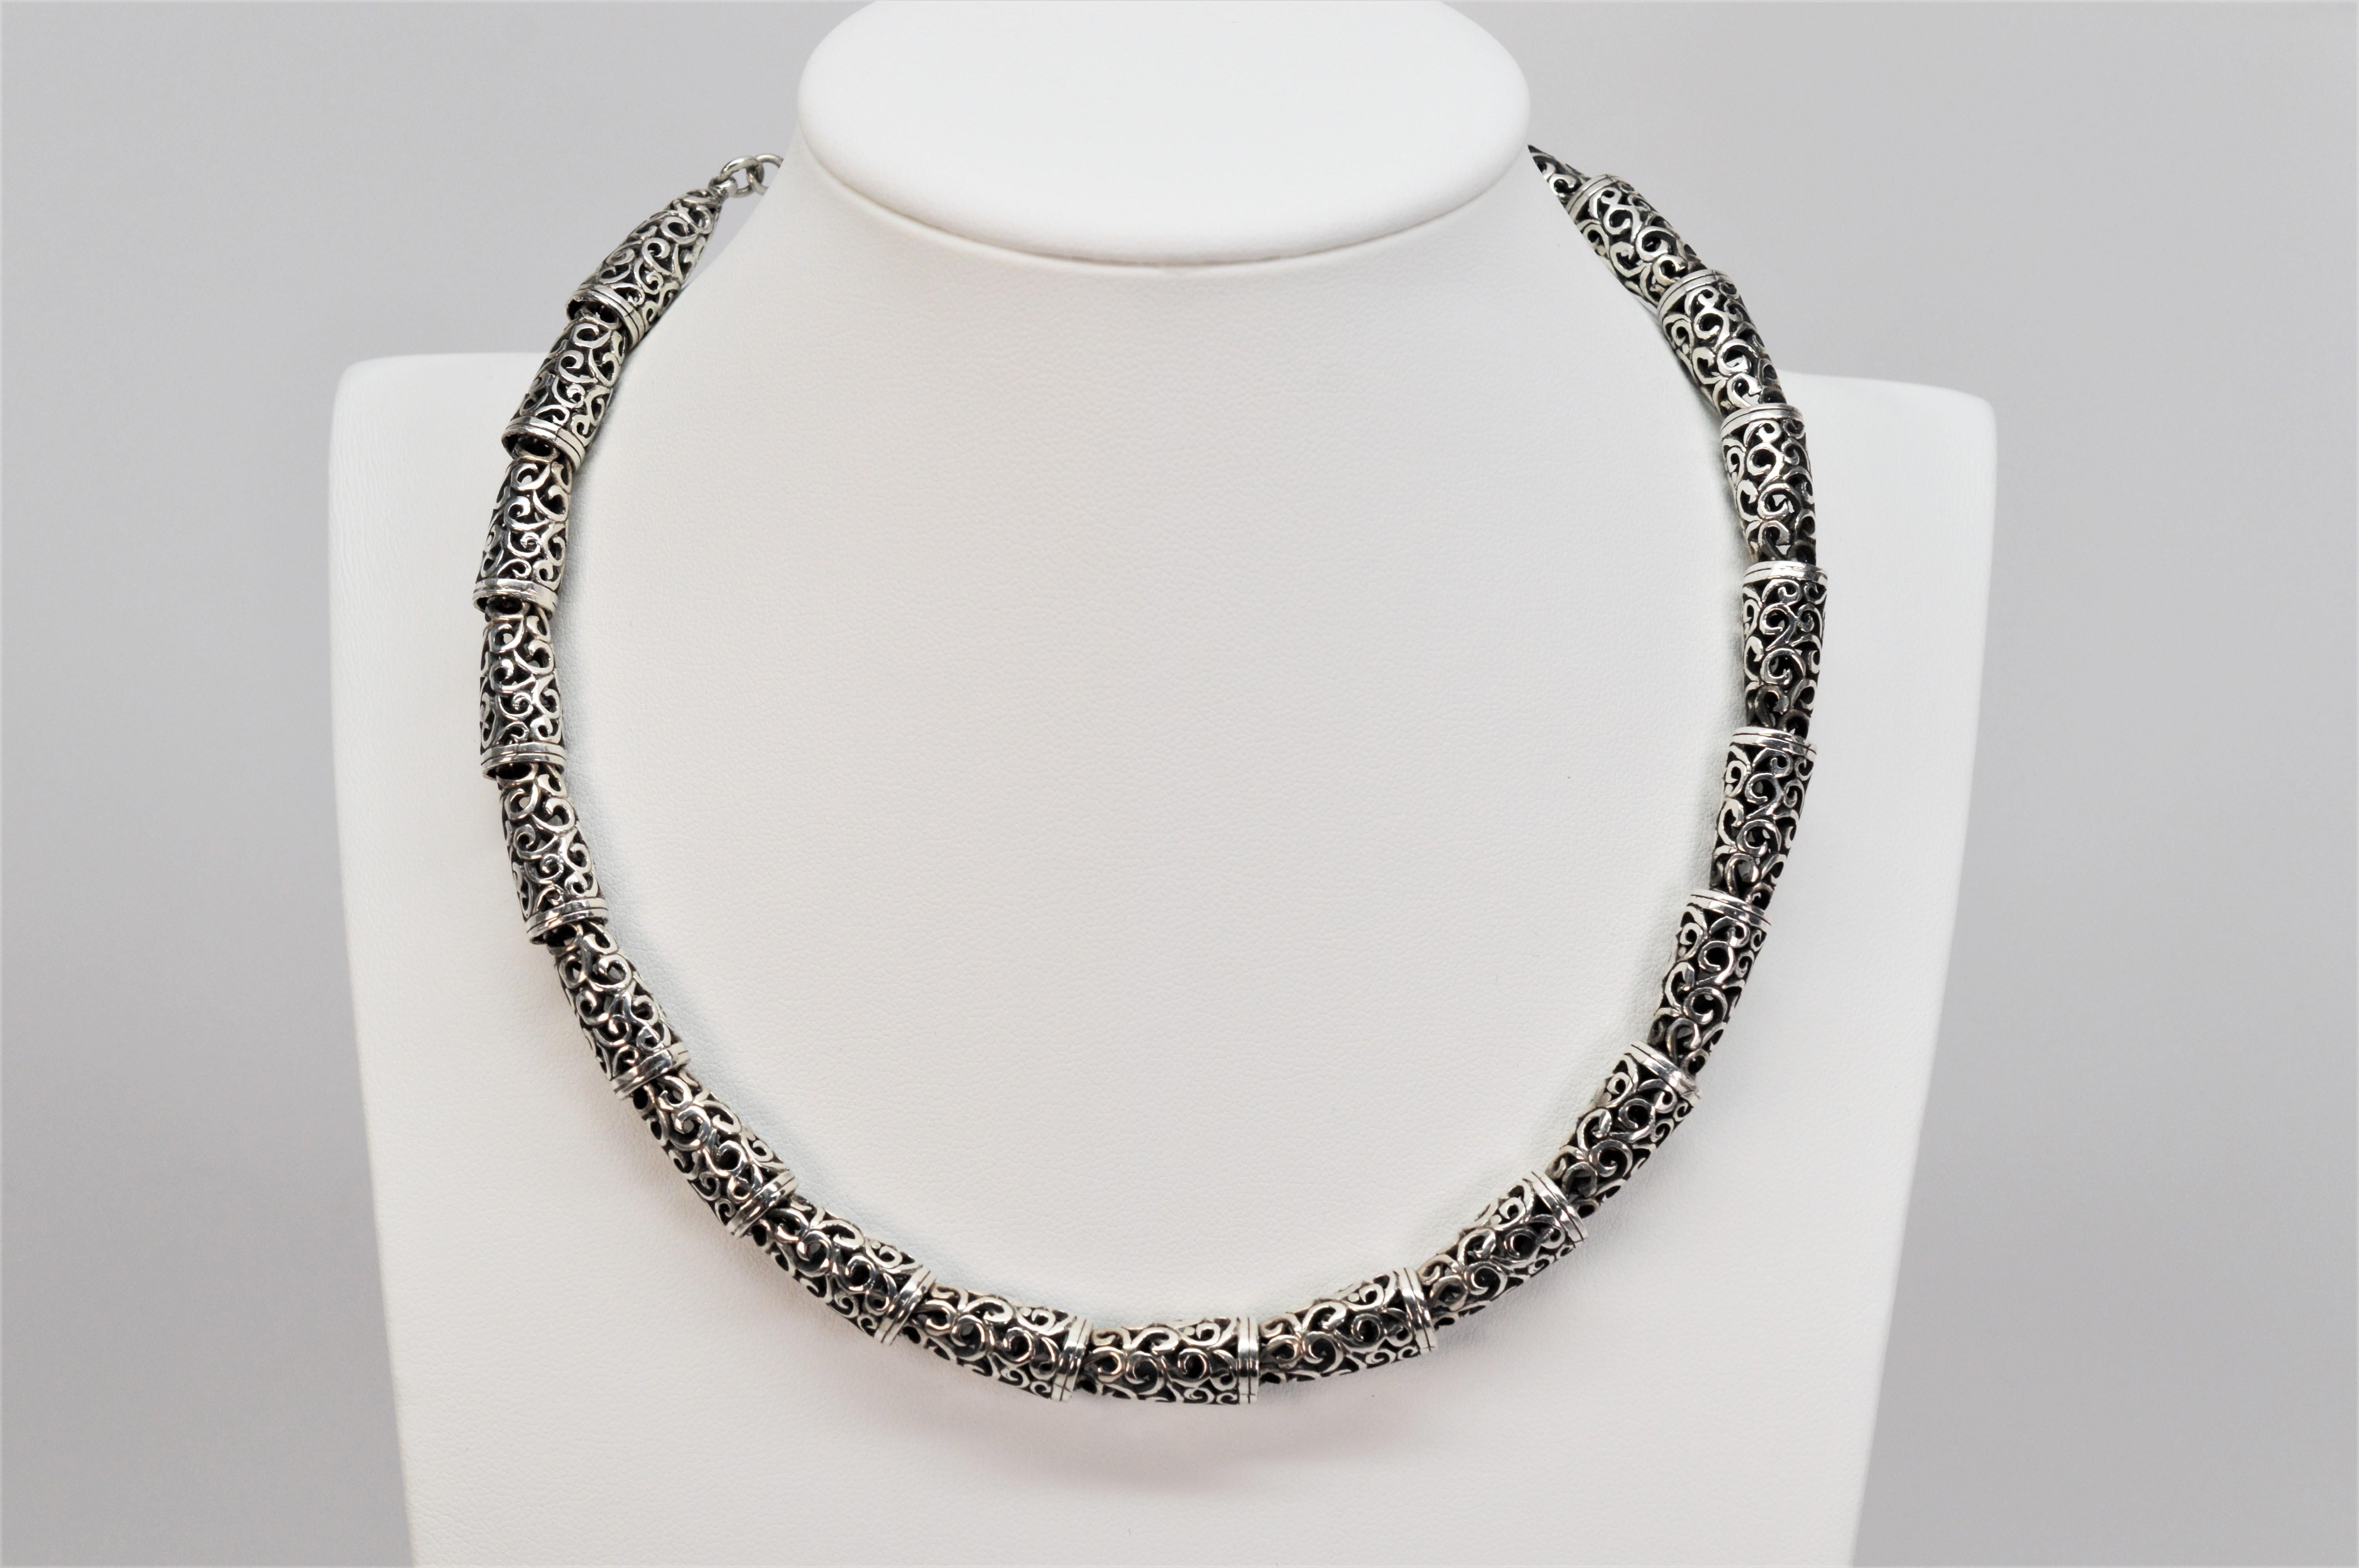 A decorative scroll pattern in individual sterling silver links create this artful collar necklace. The cut out shadow pattern adds artful dimension to this interesting silver piece. Adjustable 15 - 17 inch in length, an easy toggle clasp with